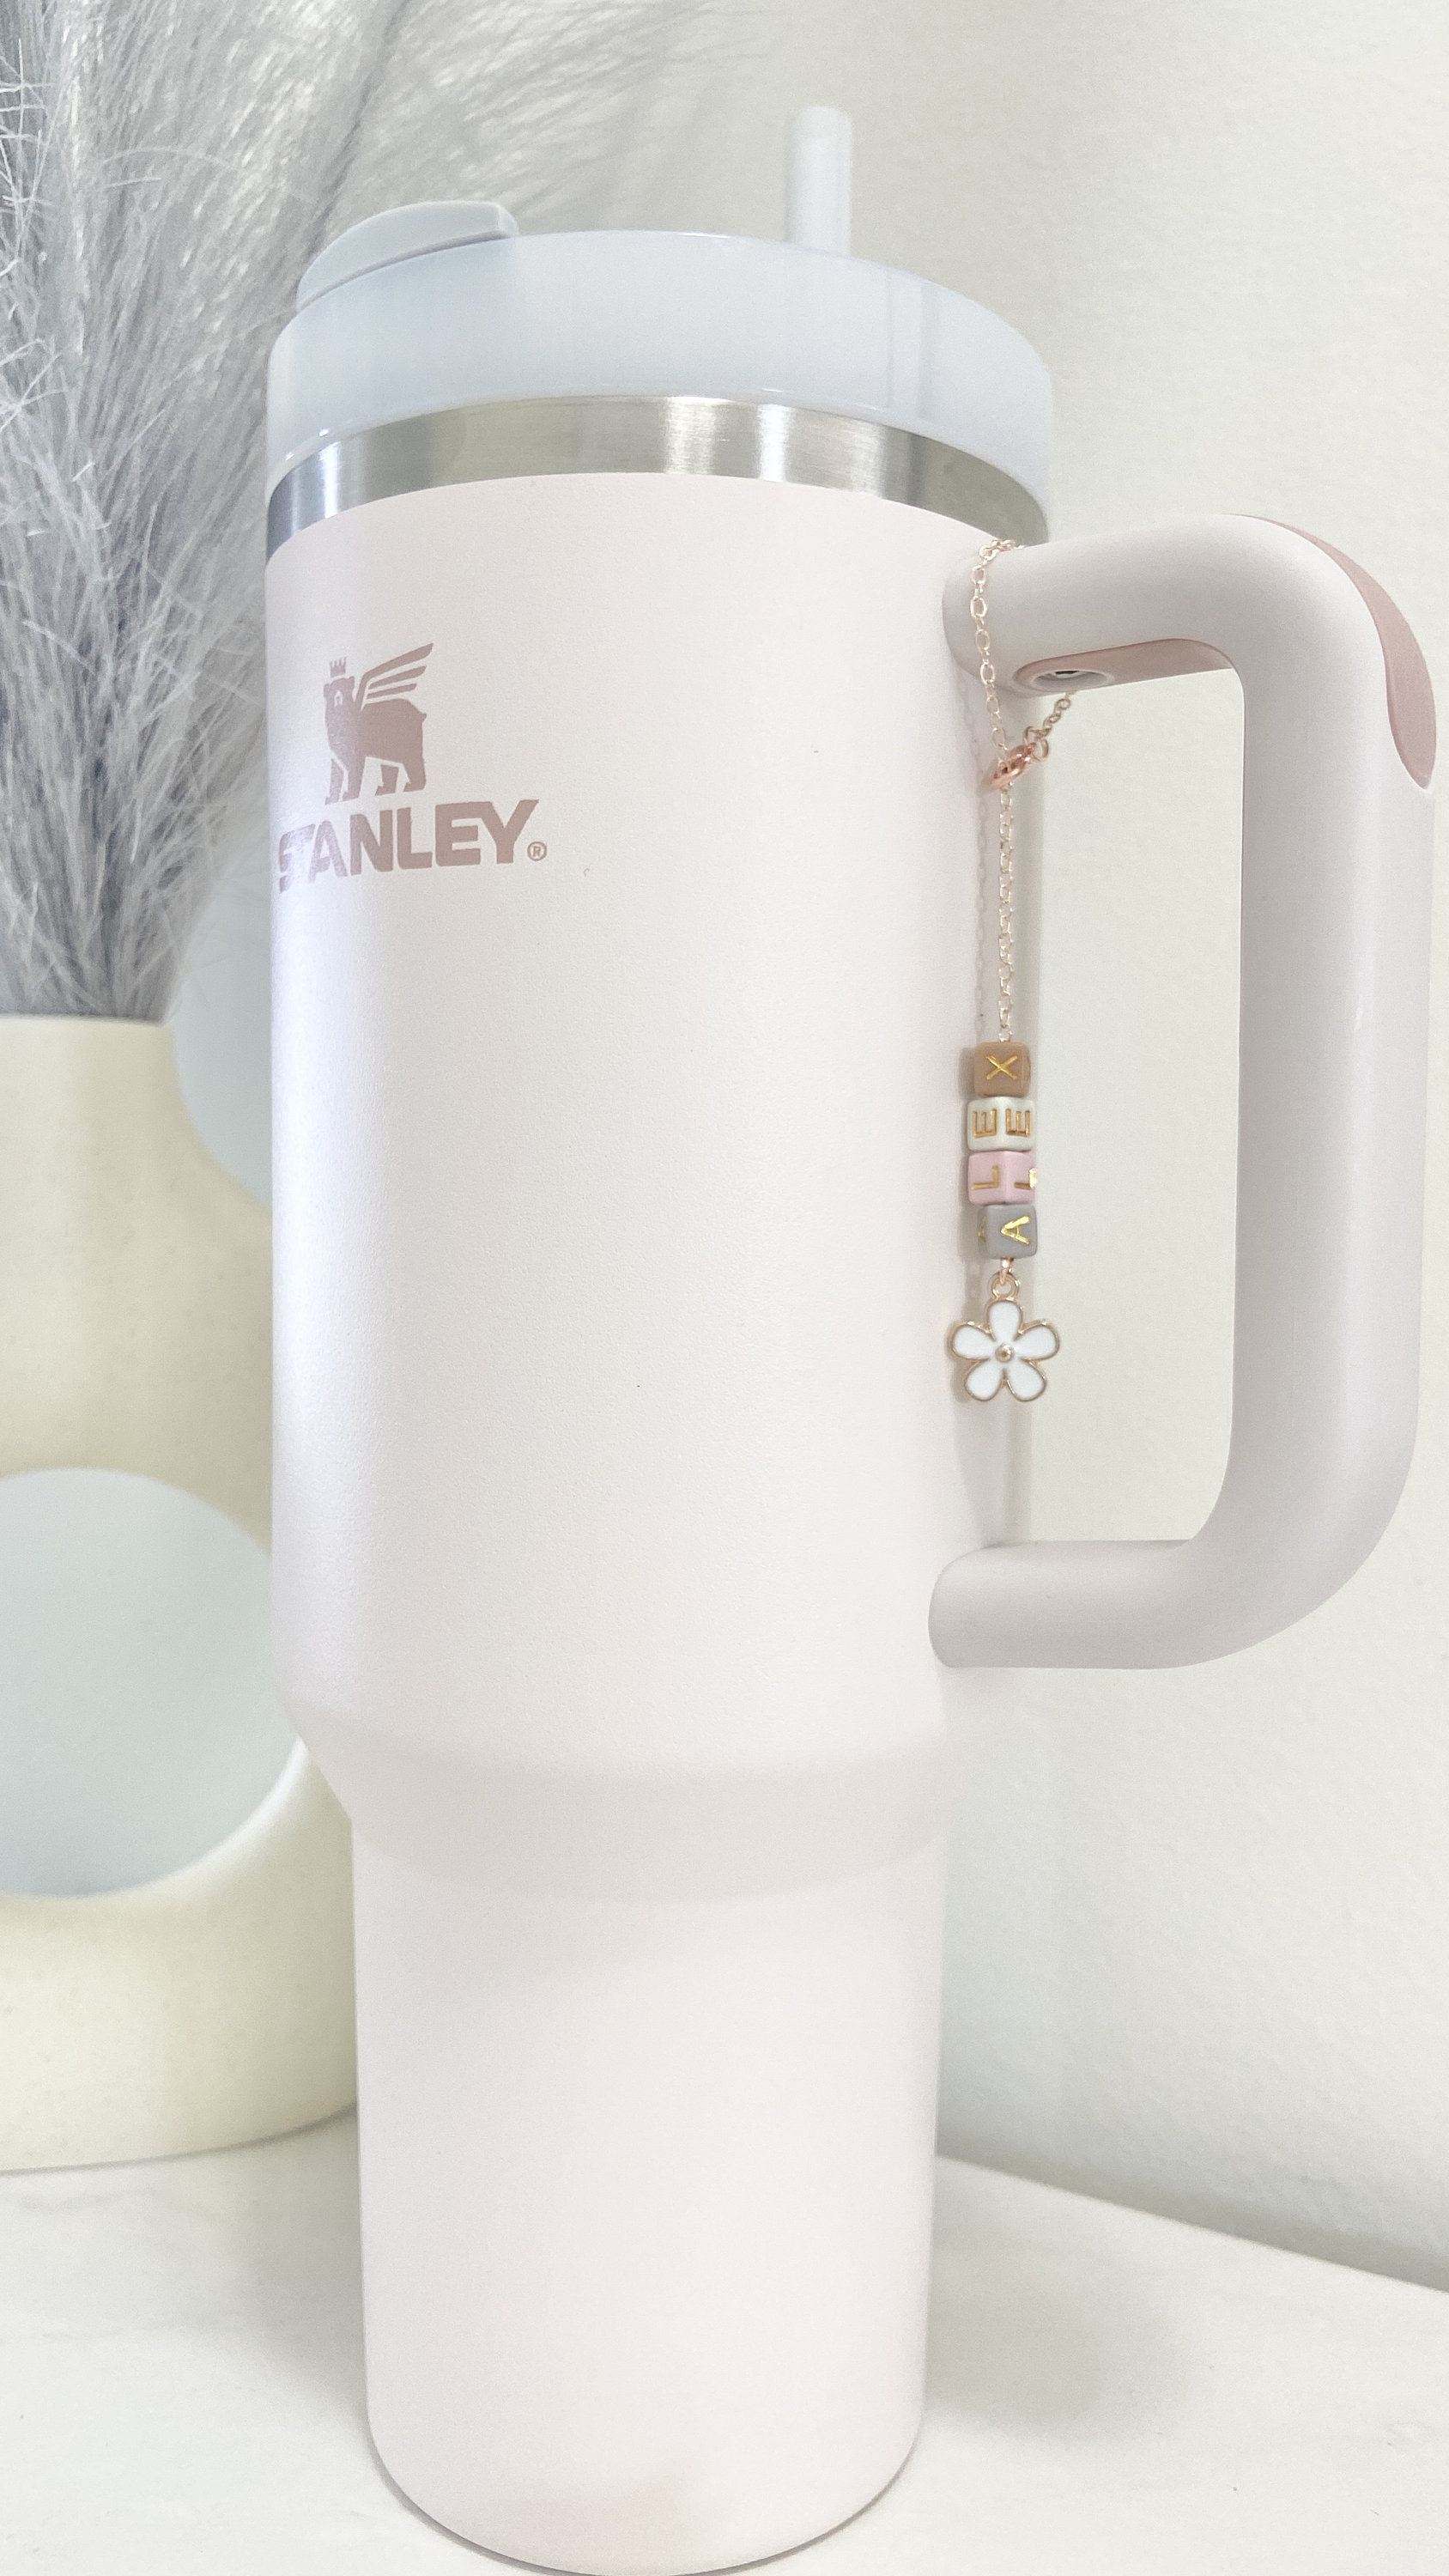 Stanley Cup Charm Stanley Accessory Water Bottle Charm Cup 